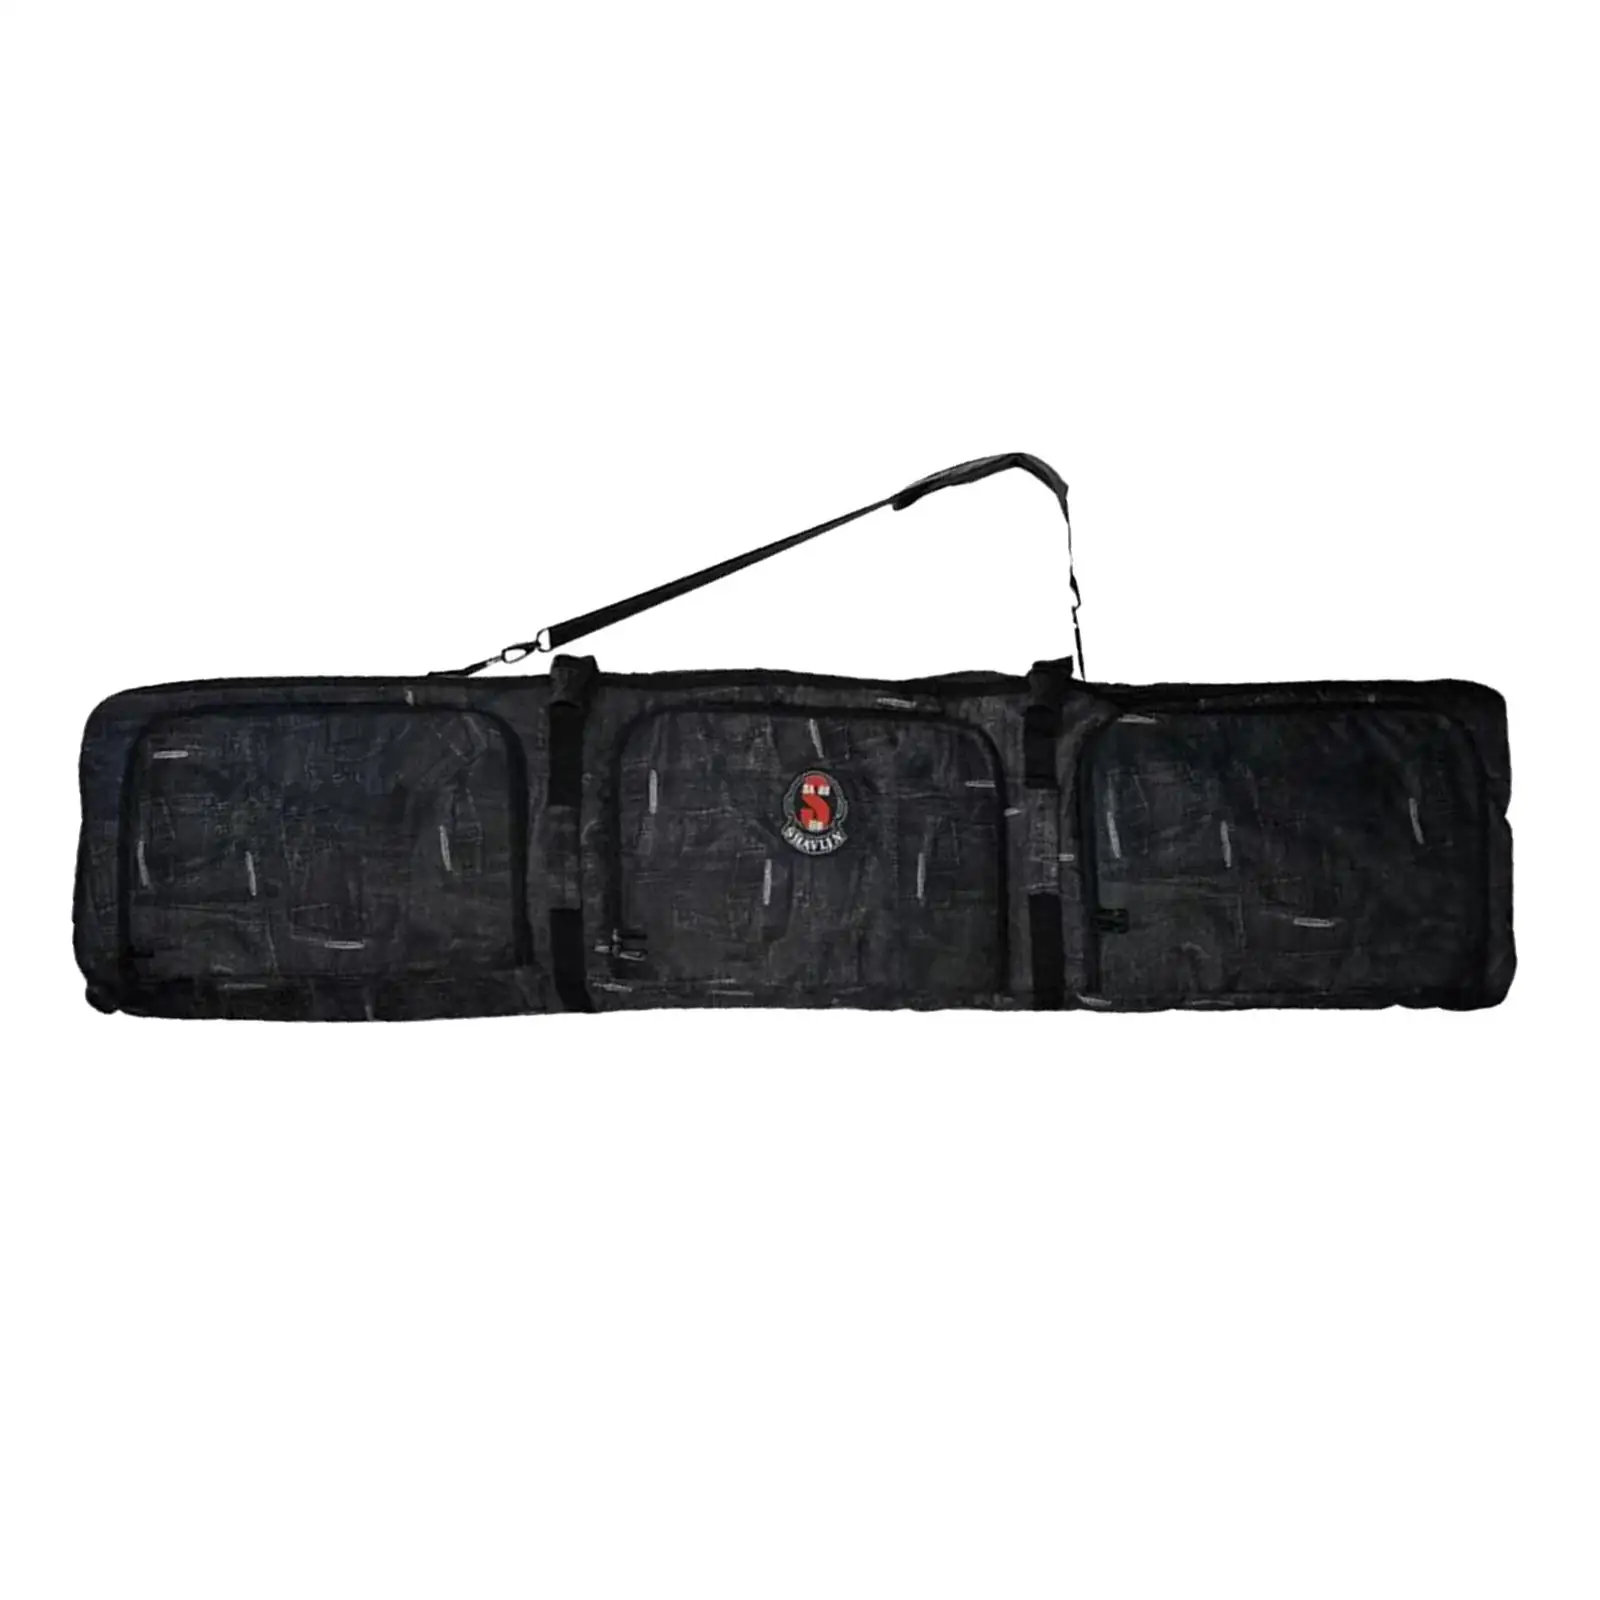 Snowboard Bag with Wheels Snowboard Travel Bag Protection for Air Travel for Trip Skiing Boards Women Men Playing Outdoor